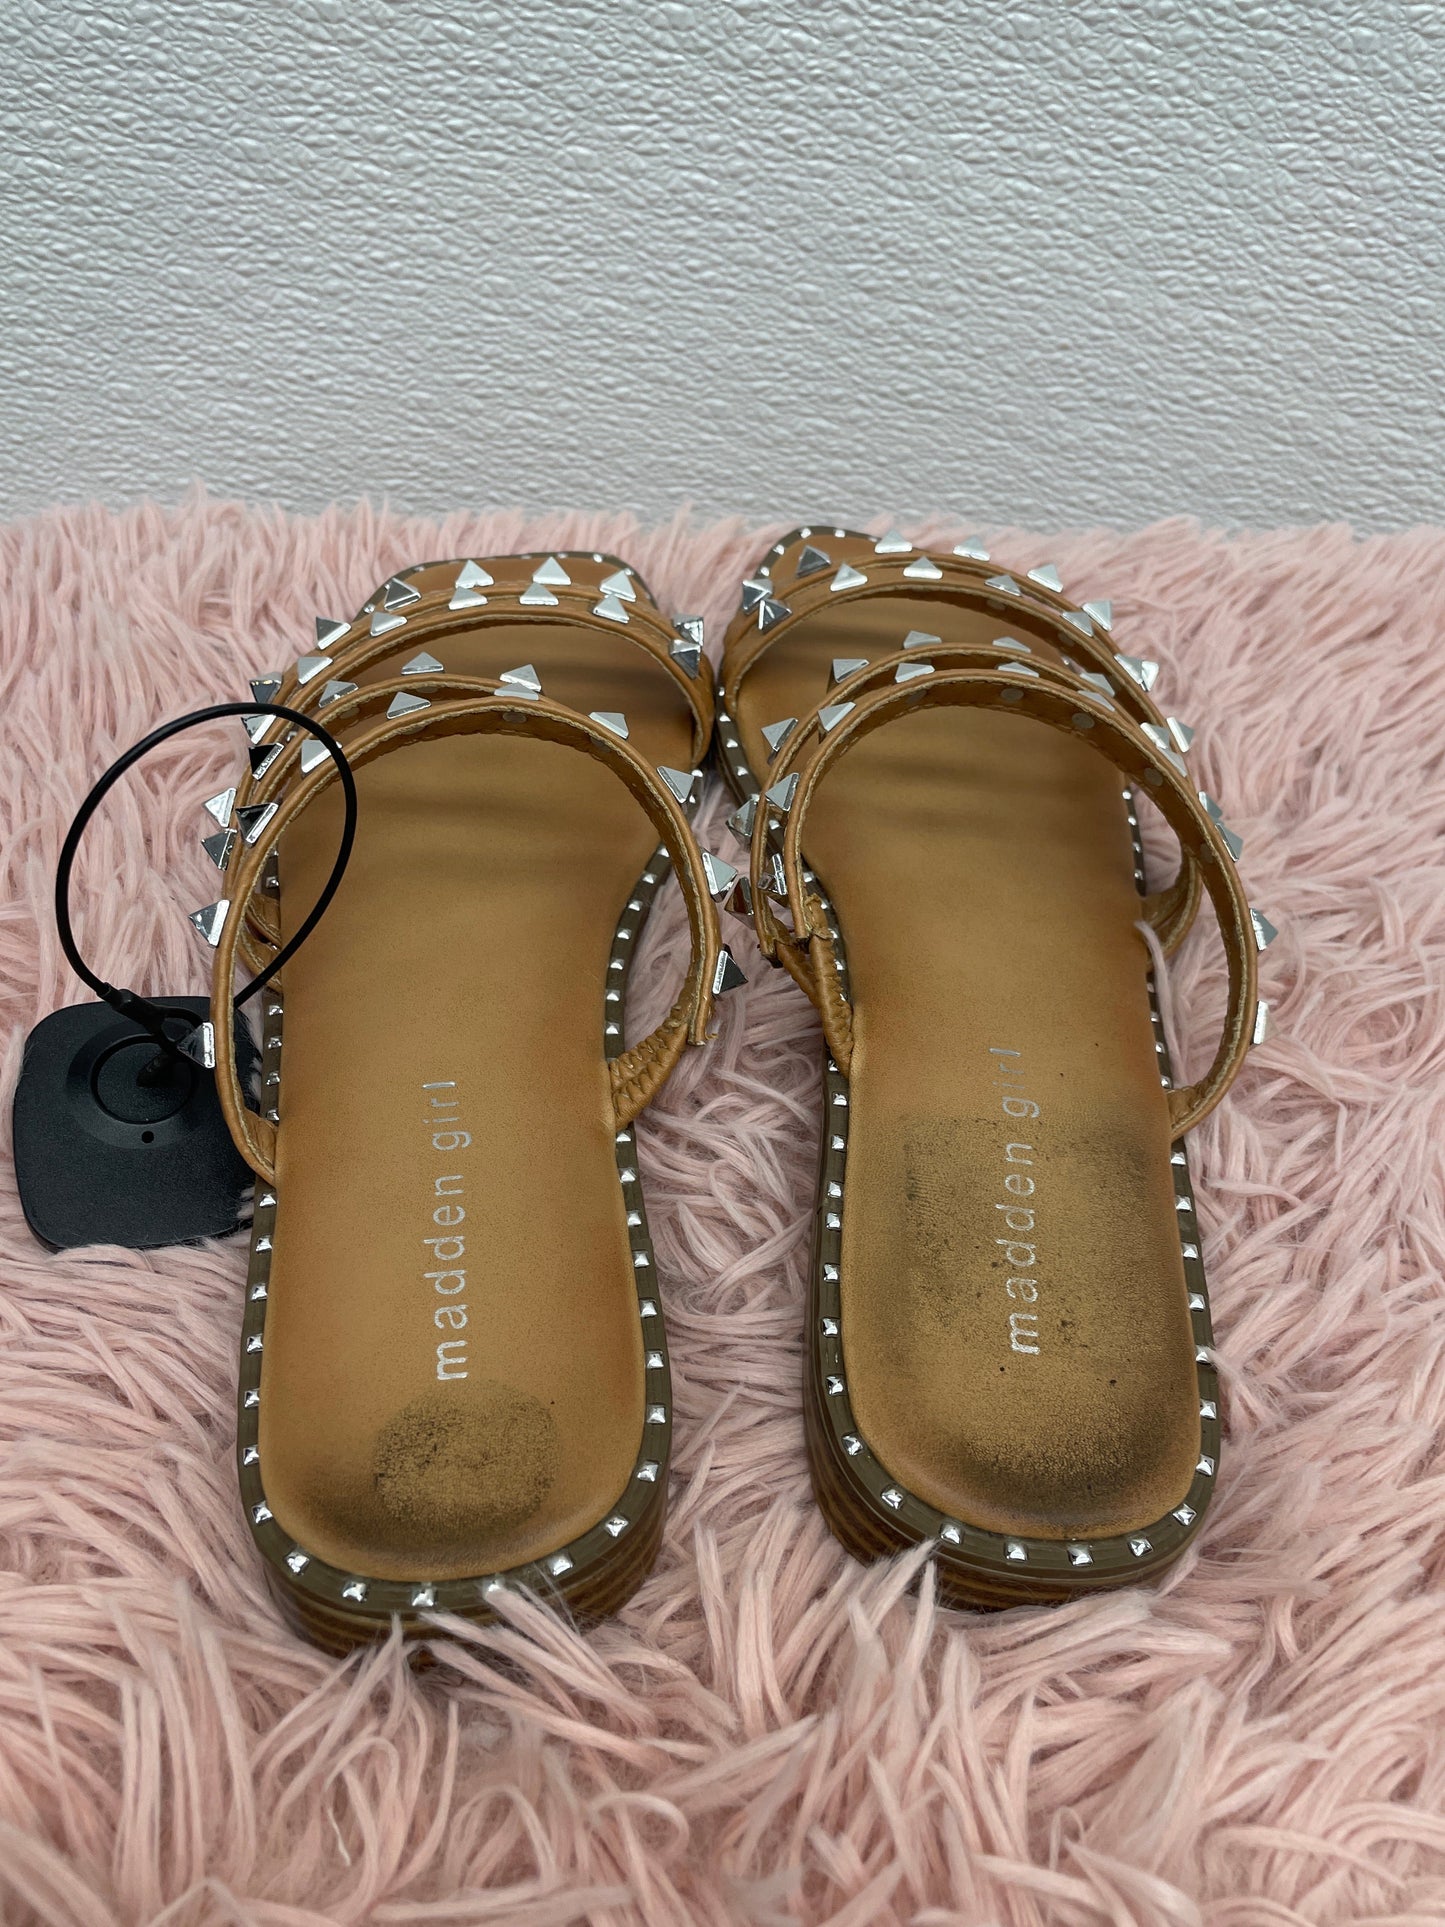 Sandals Flats By Madden Girl  Size: 7.5